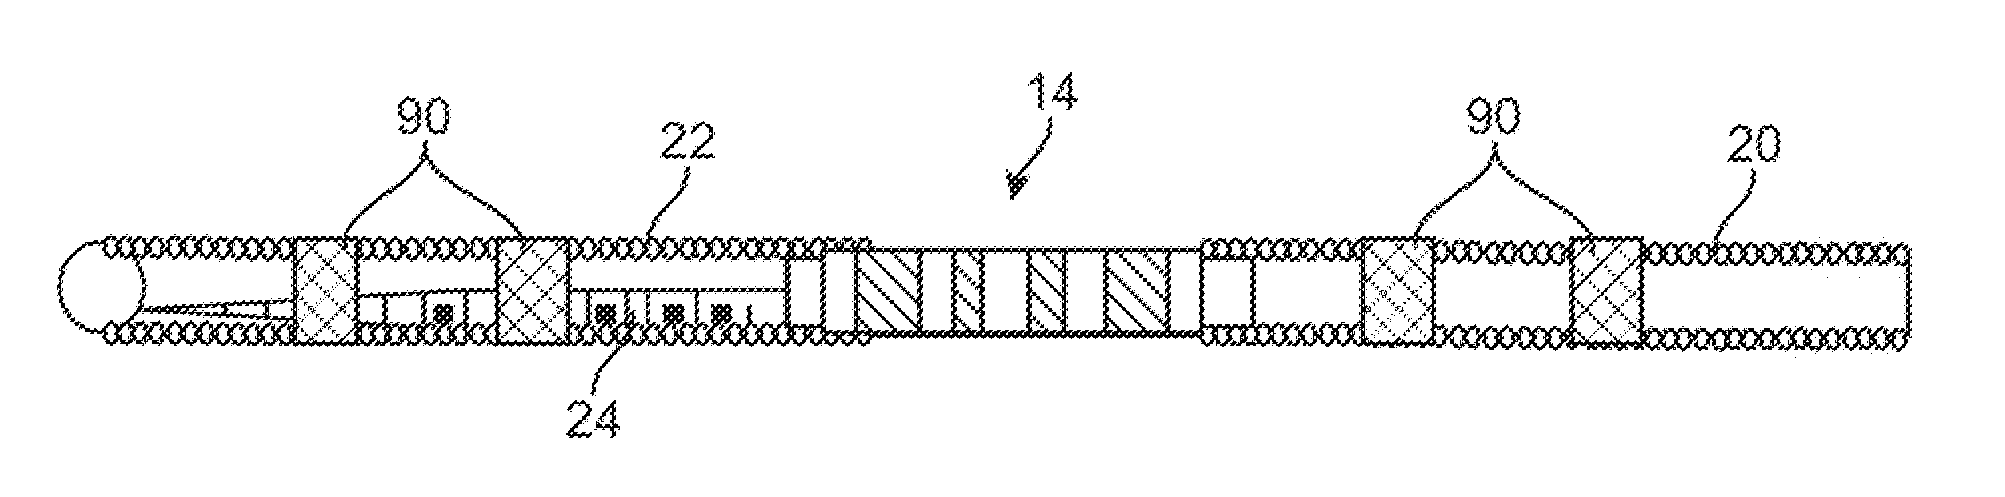 Guidewire assembly methods and apparatus